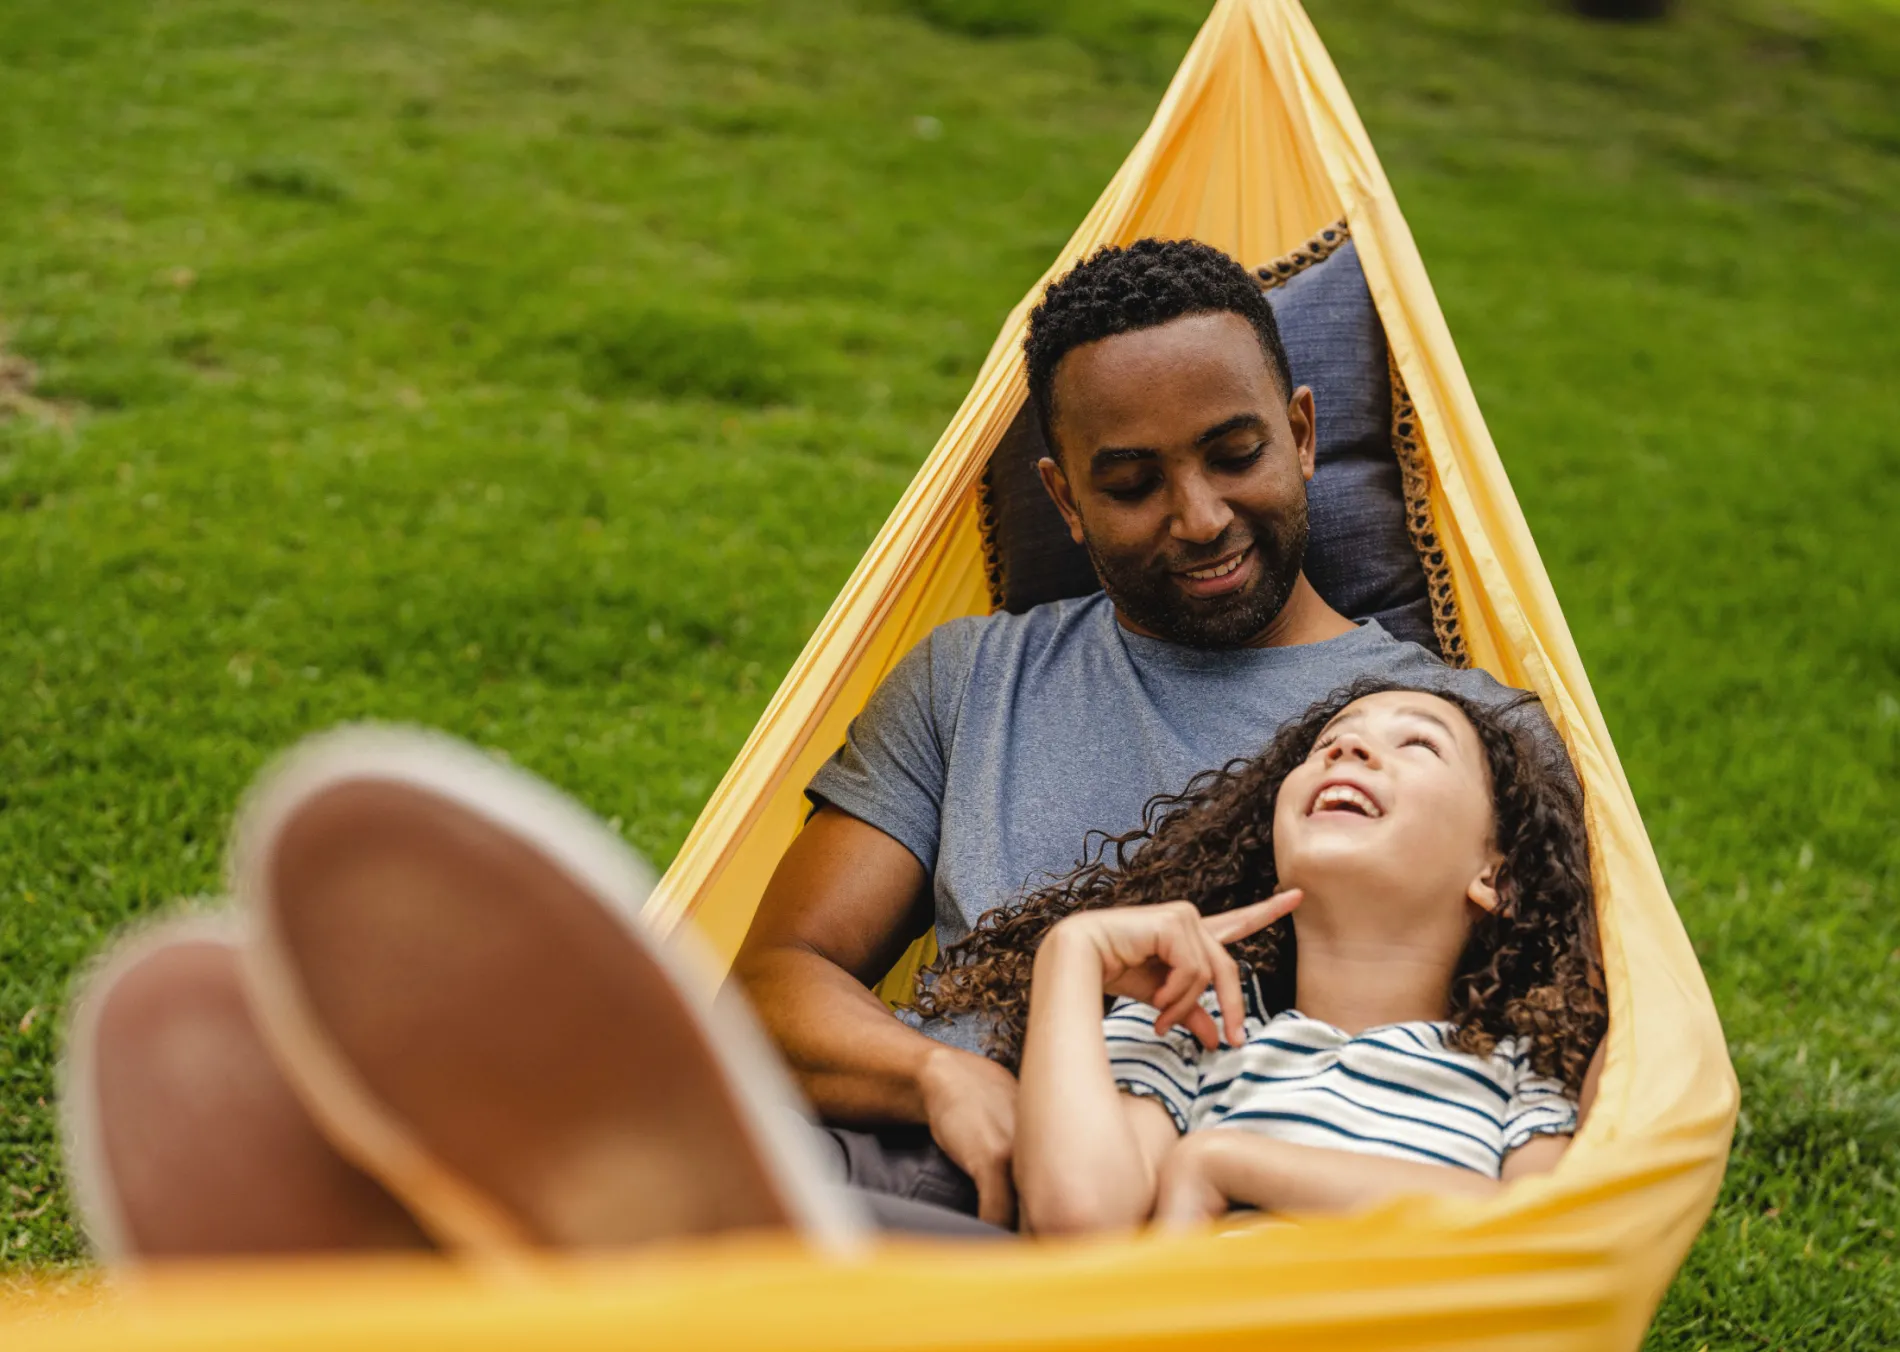 A dad and daughter in a hammock